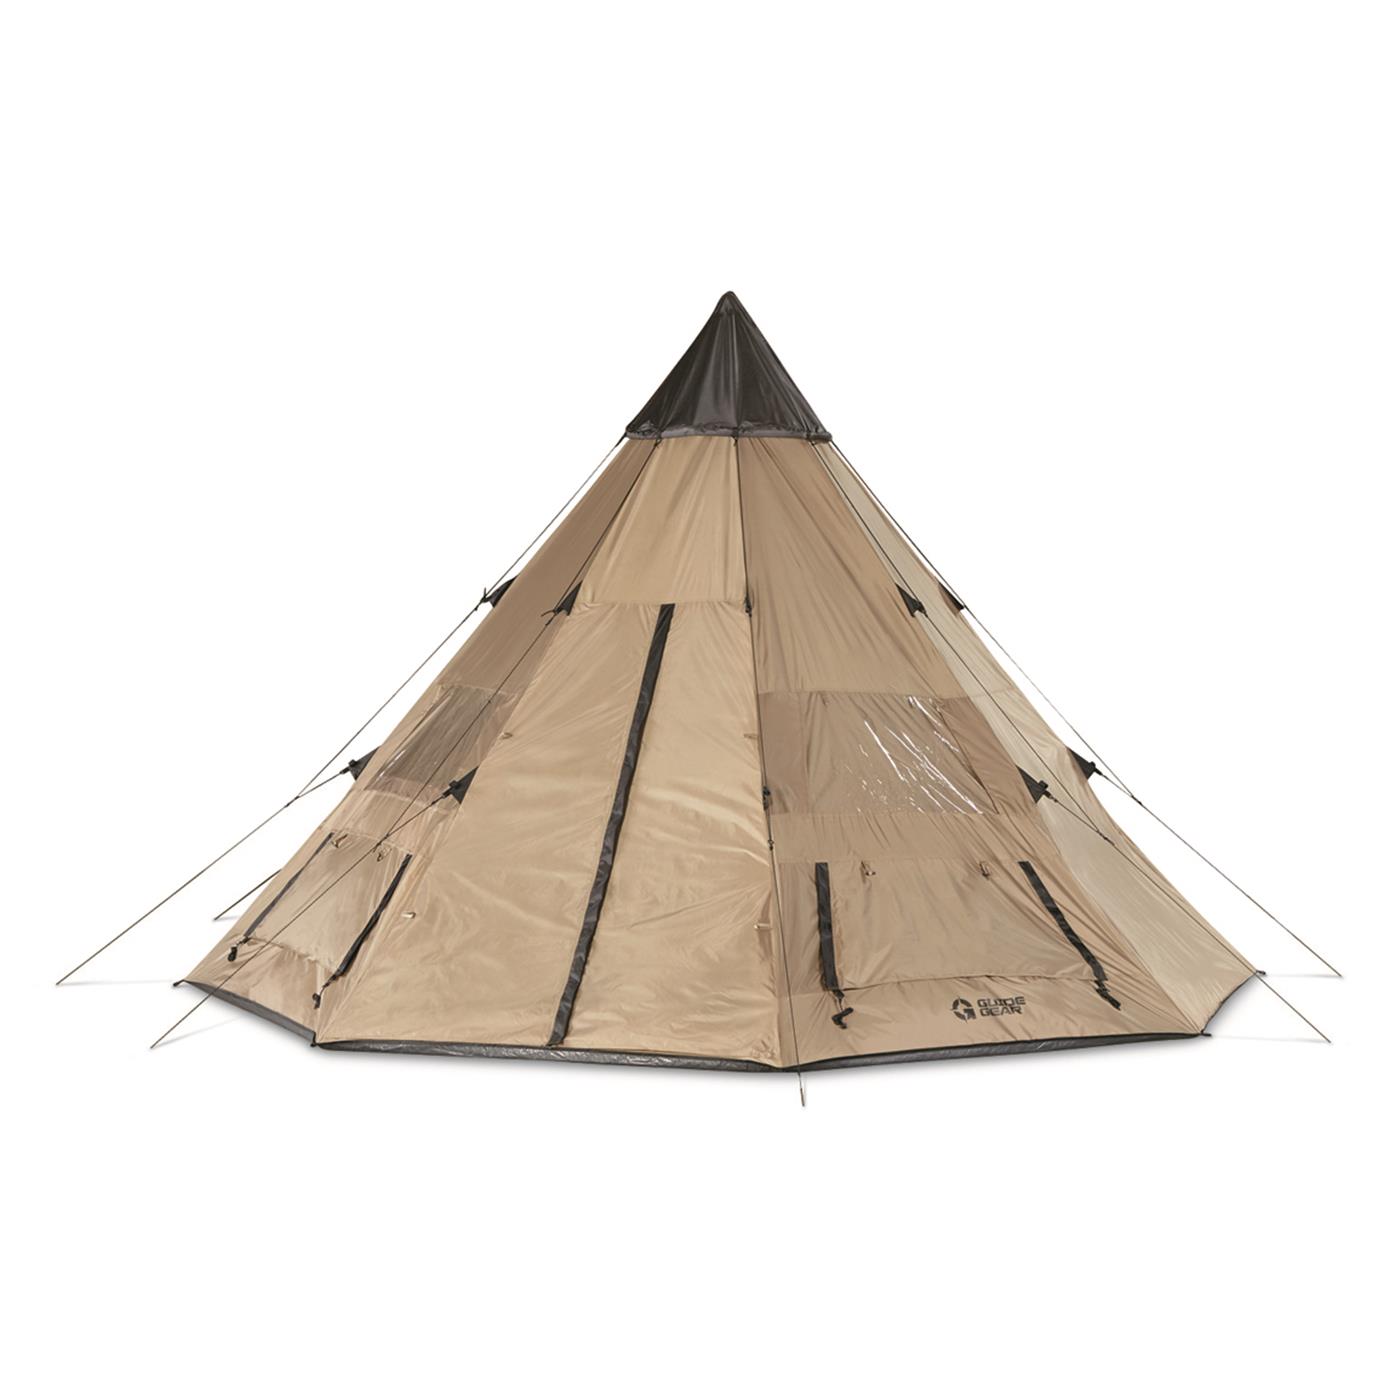 Guide Gear Camping Teepee Tent for Adults, Outdoor, Waterproof, Family, 6 Person, 14' x 14' - image 3 of 12